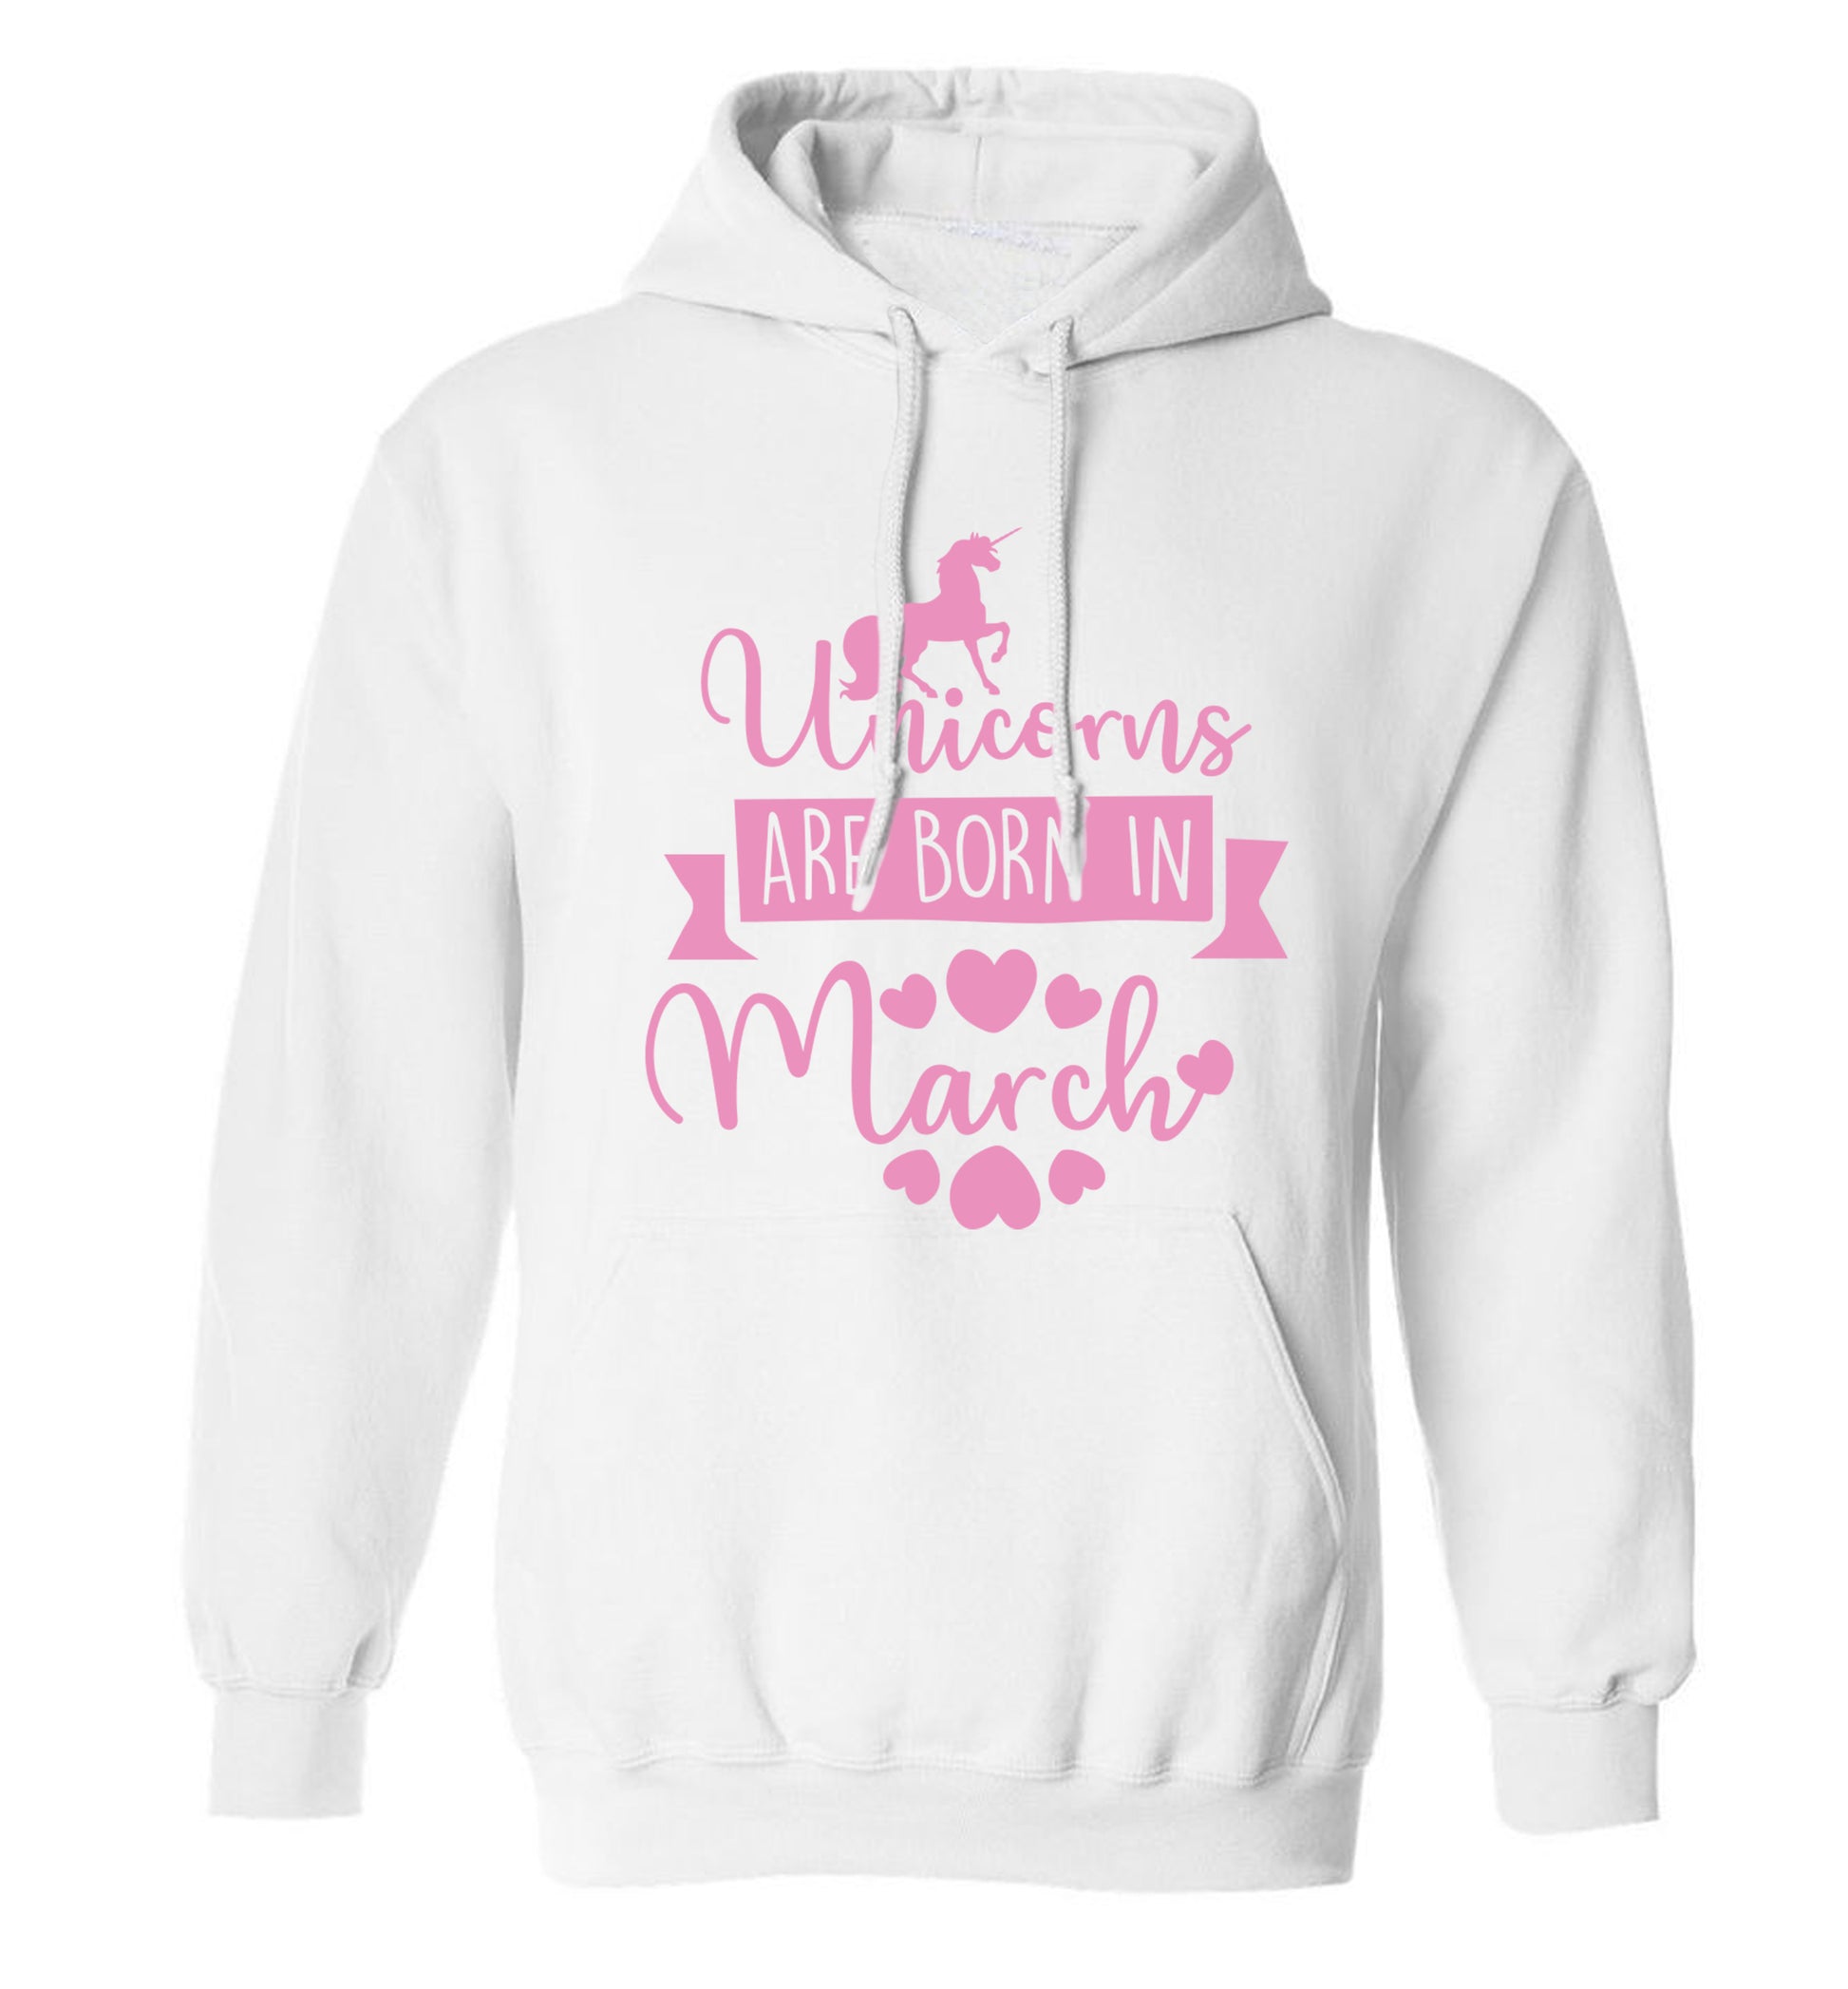 Unicorns are born in March adults unisex white hoodie 2XL